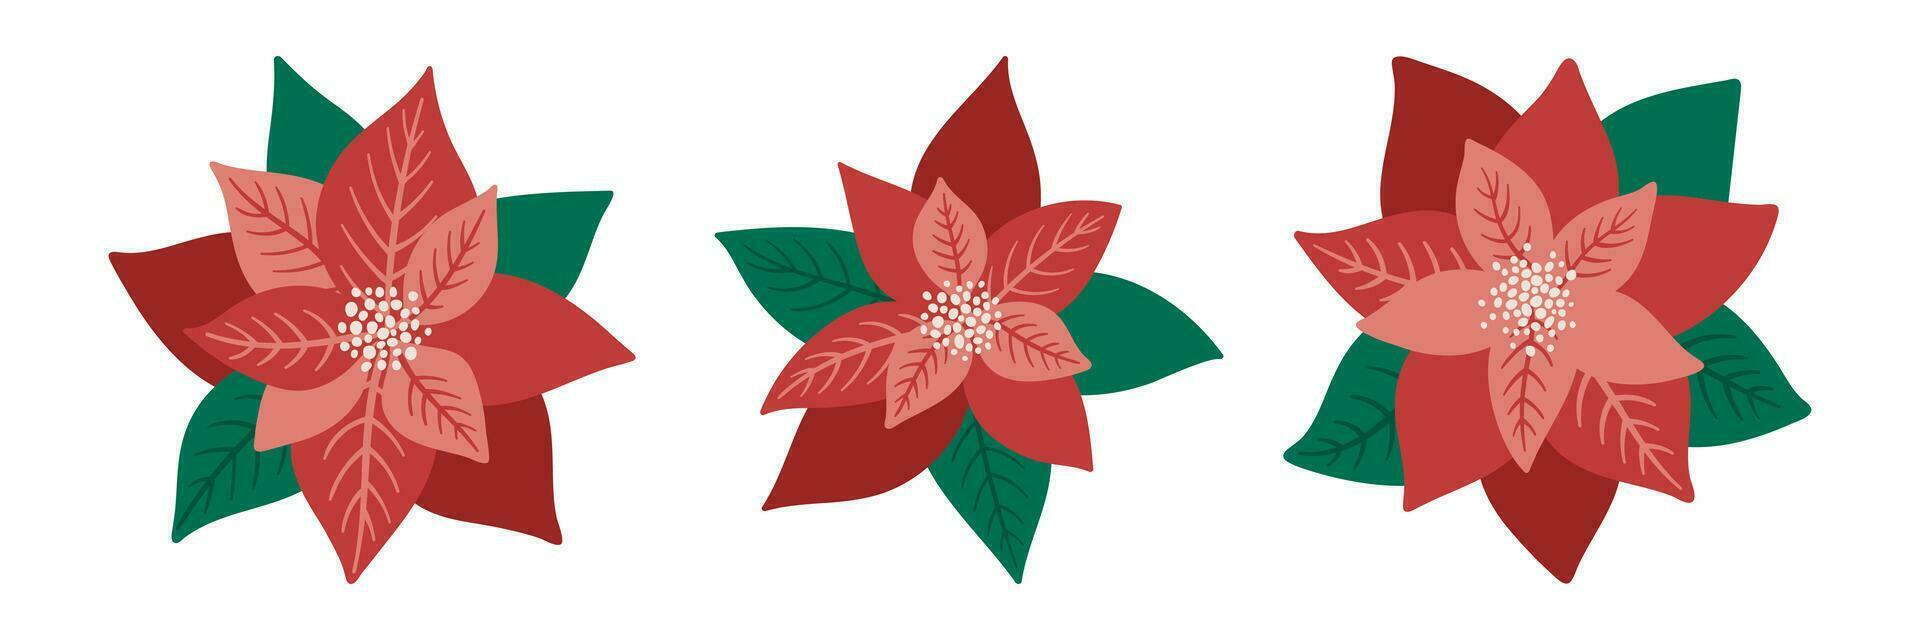 Poinsettia flowers vector set for Christmas and New Year holidays.